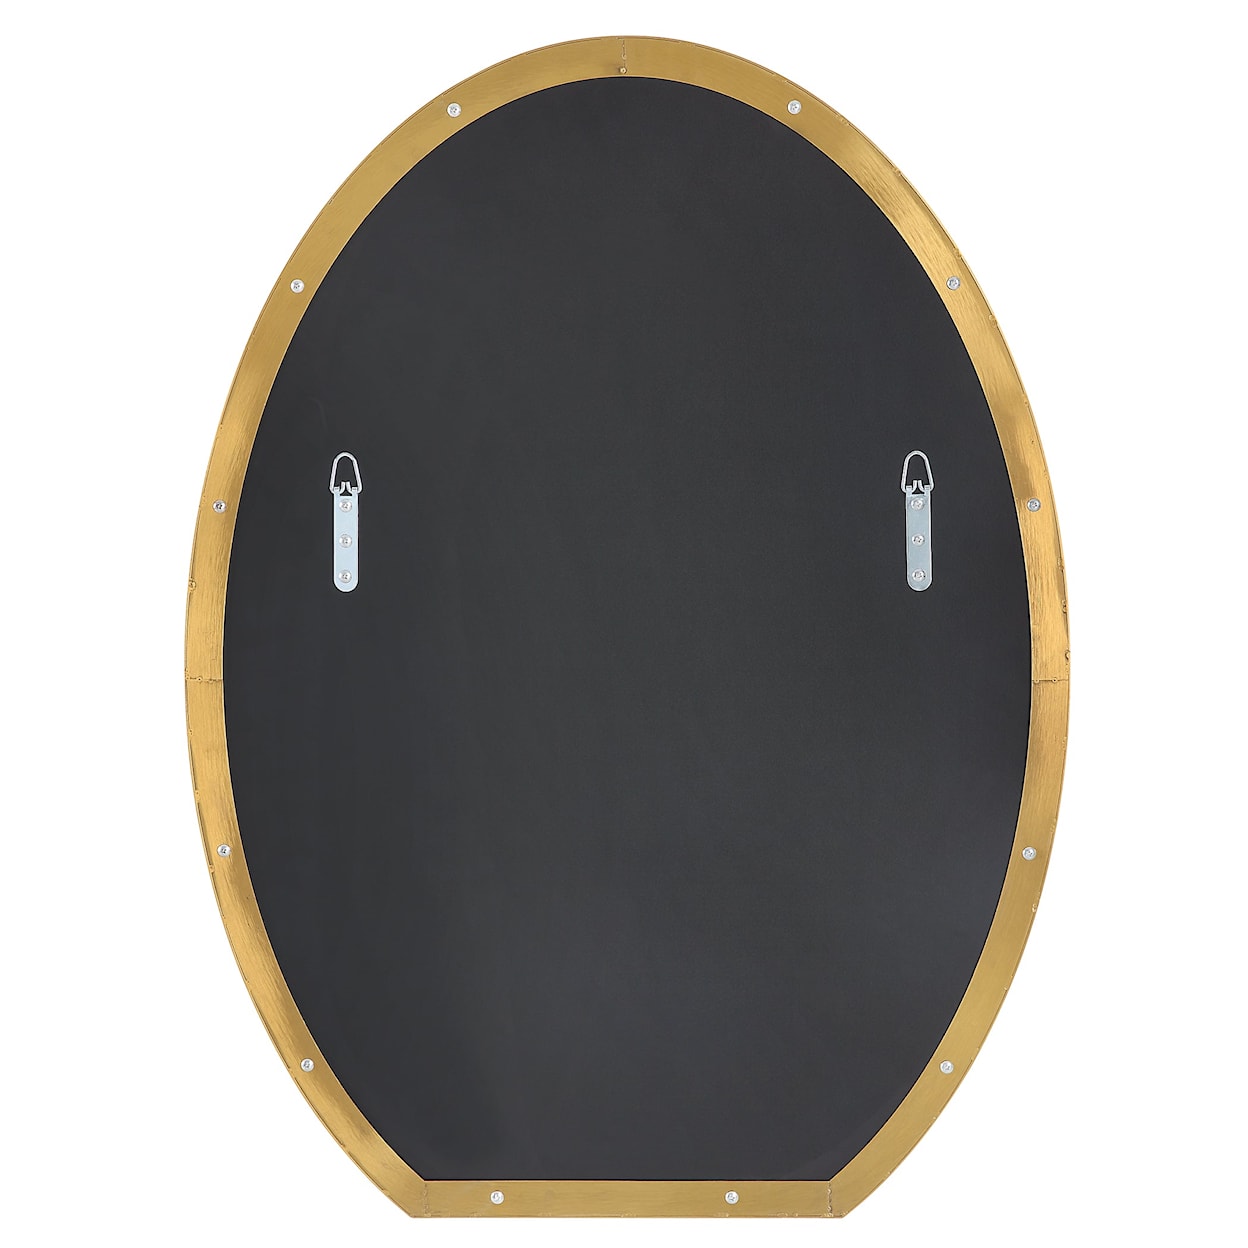 Uttermost Cabell Cabell Brass Oval Mirror